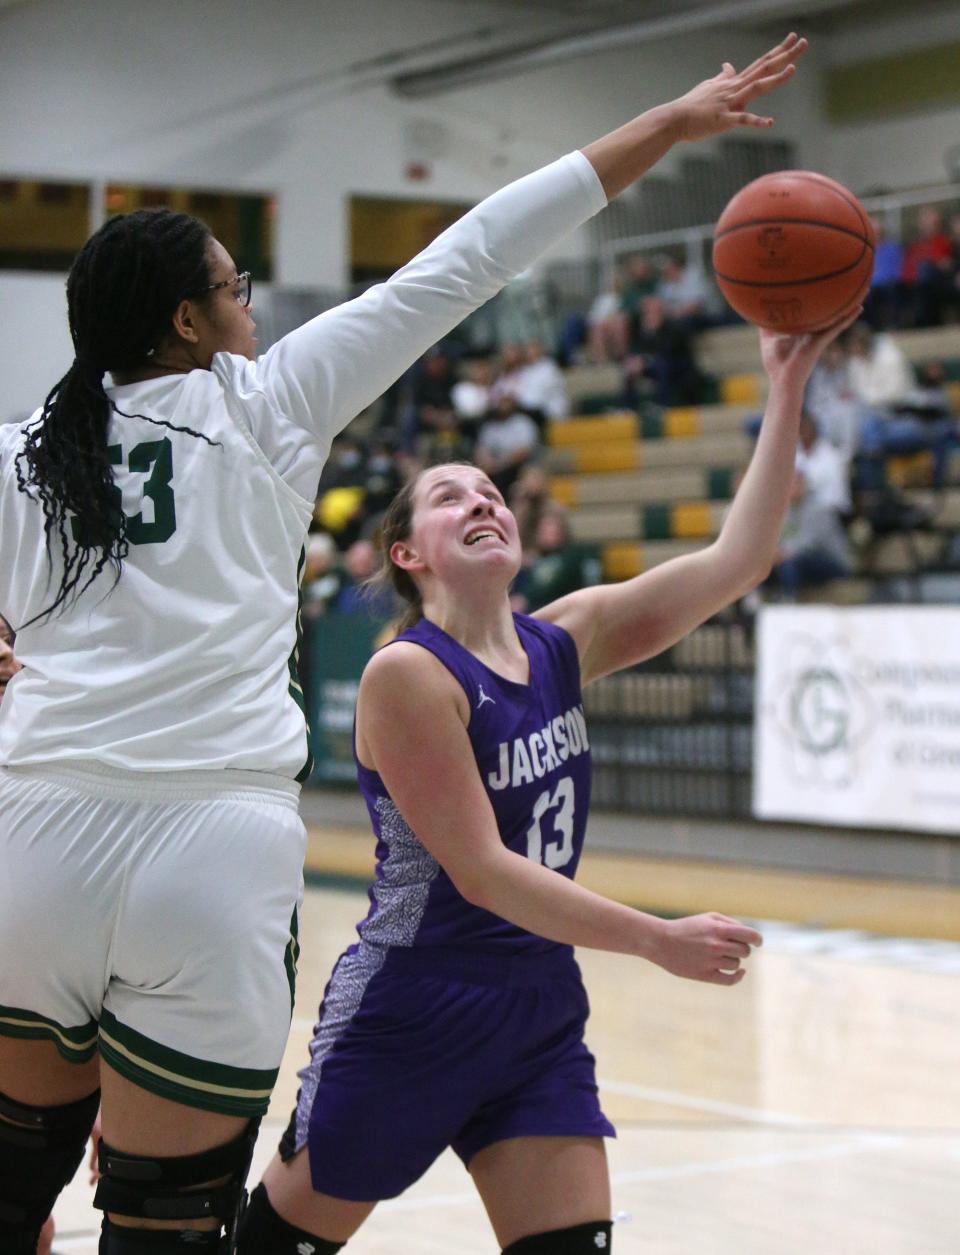 Jackson's Emma Dretke (13) takes a shot while being guarded by GlenOak's Jordan Weir (53) during their game at GlenOak on Wednesday.